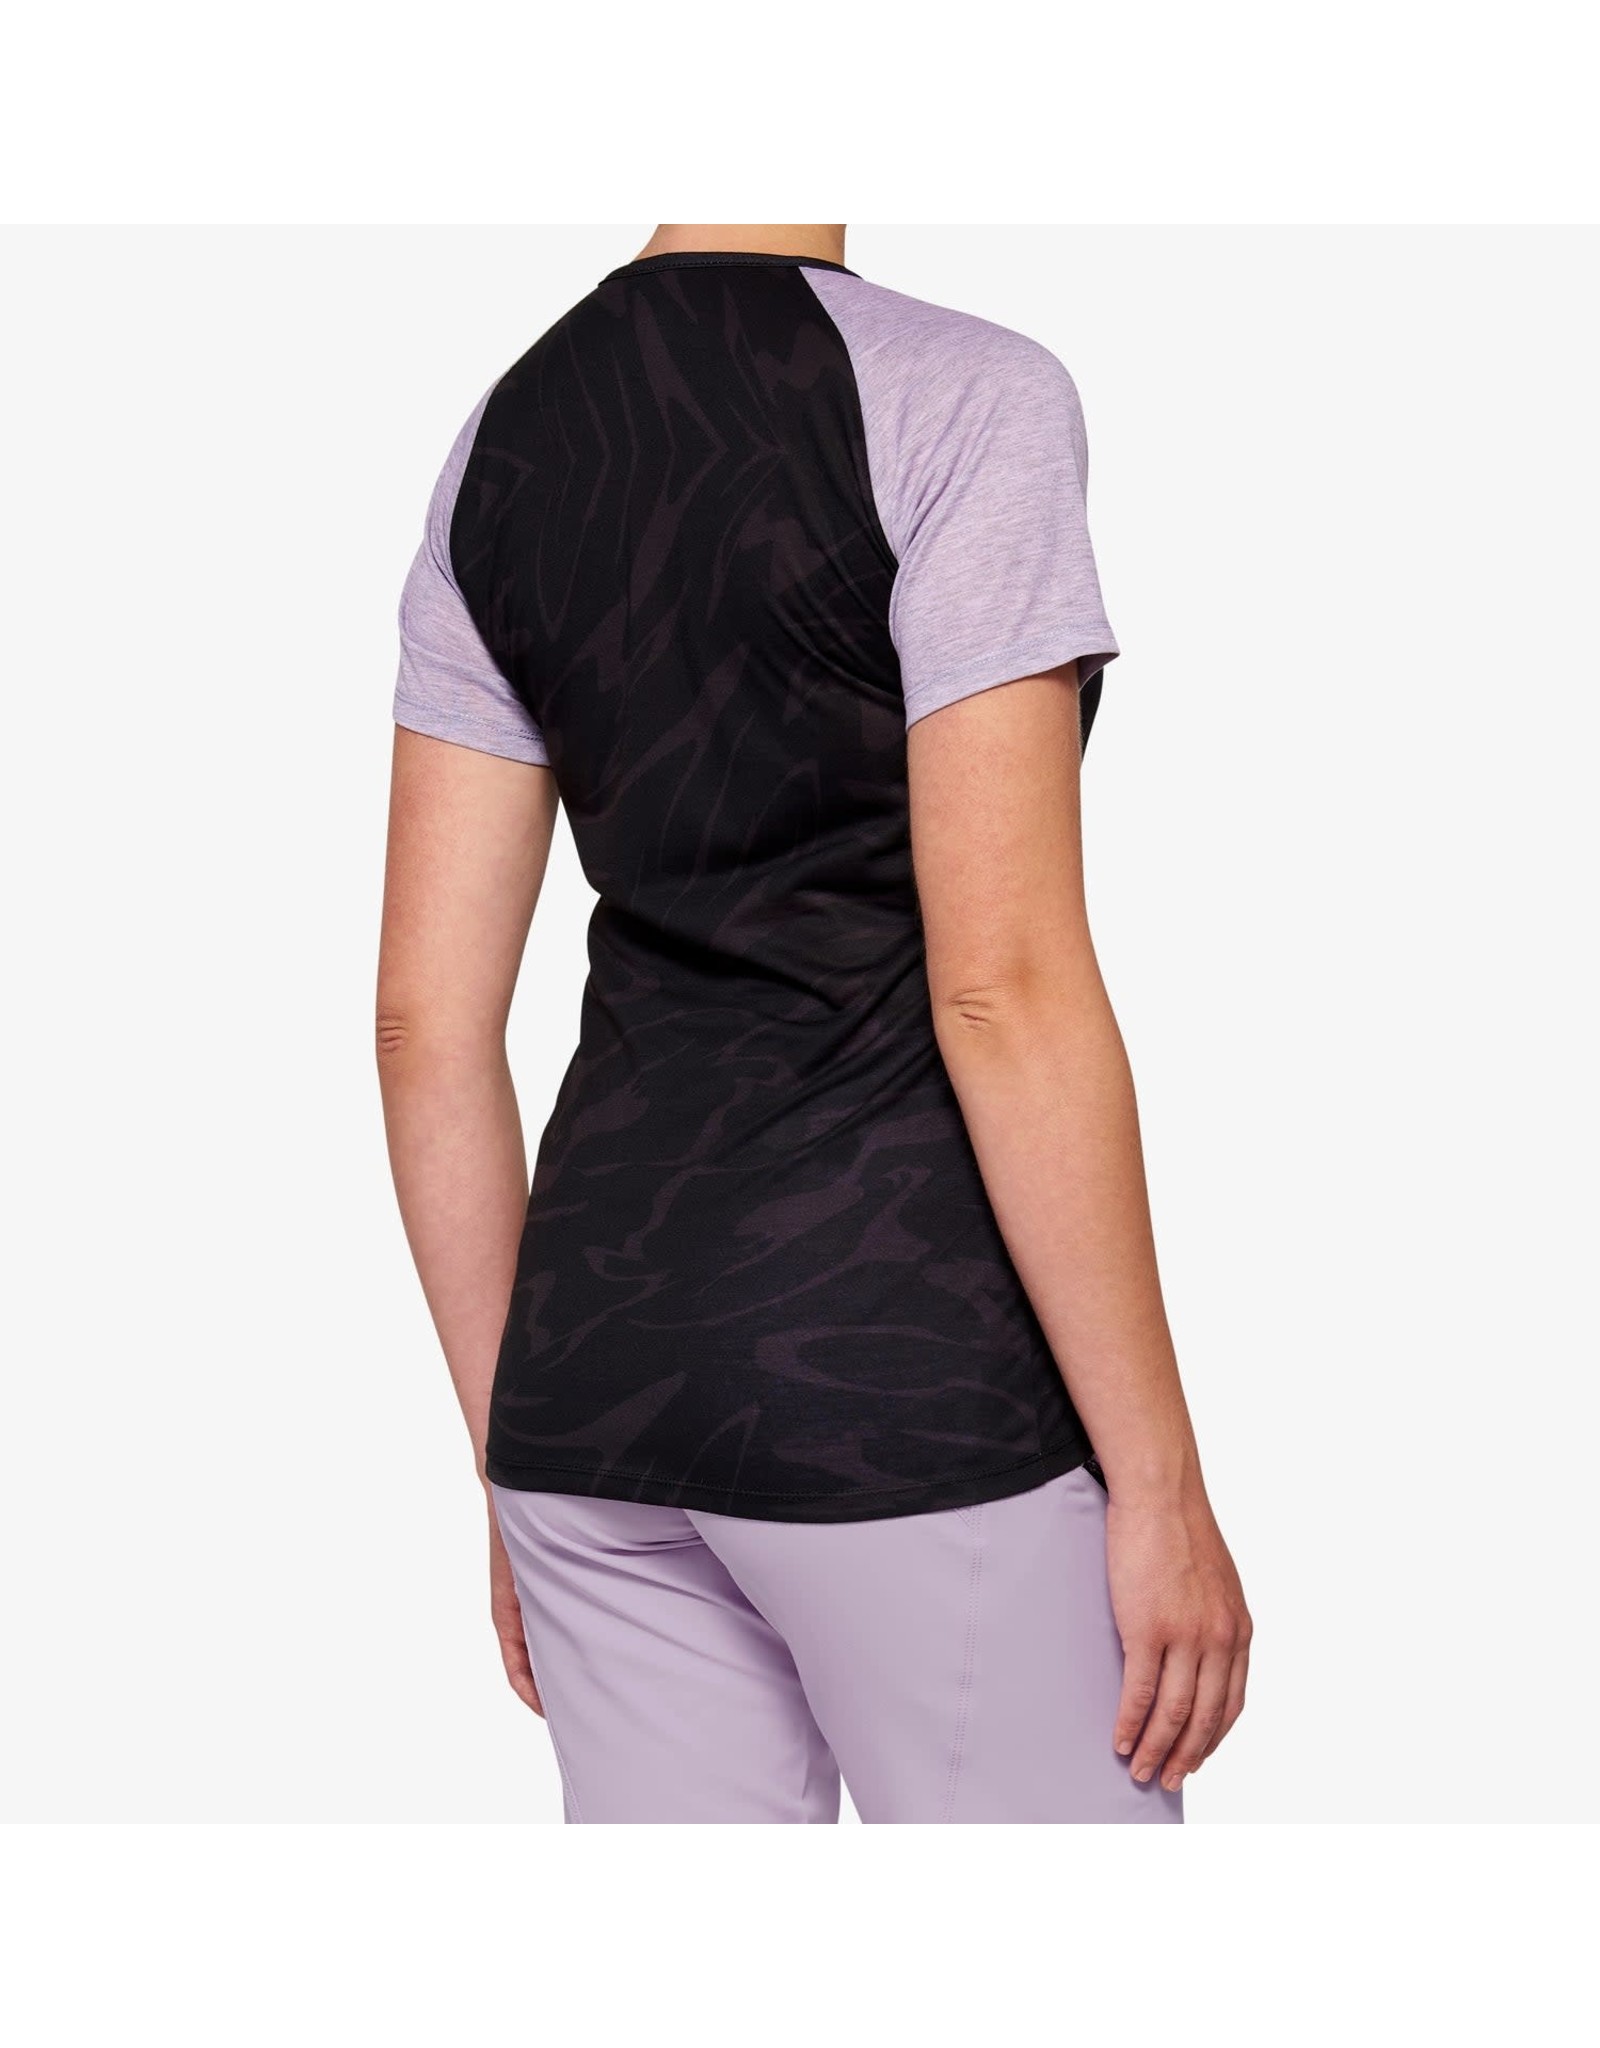 100% AIRMATIC JERSEY FEMME